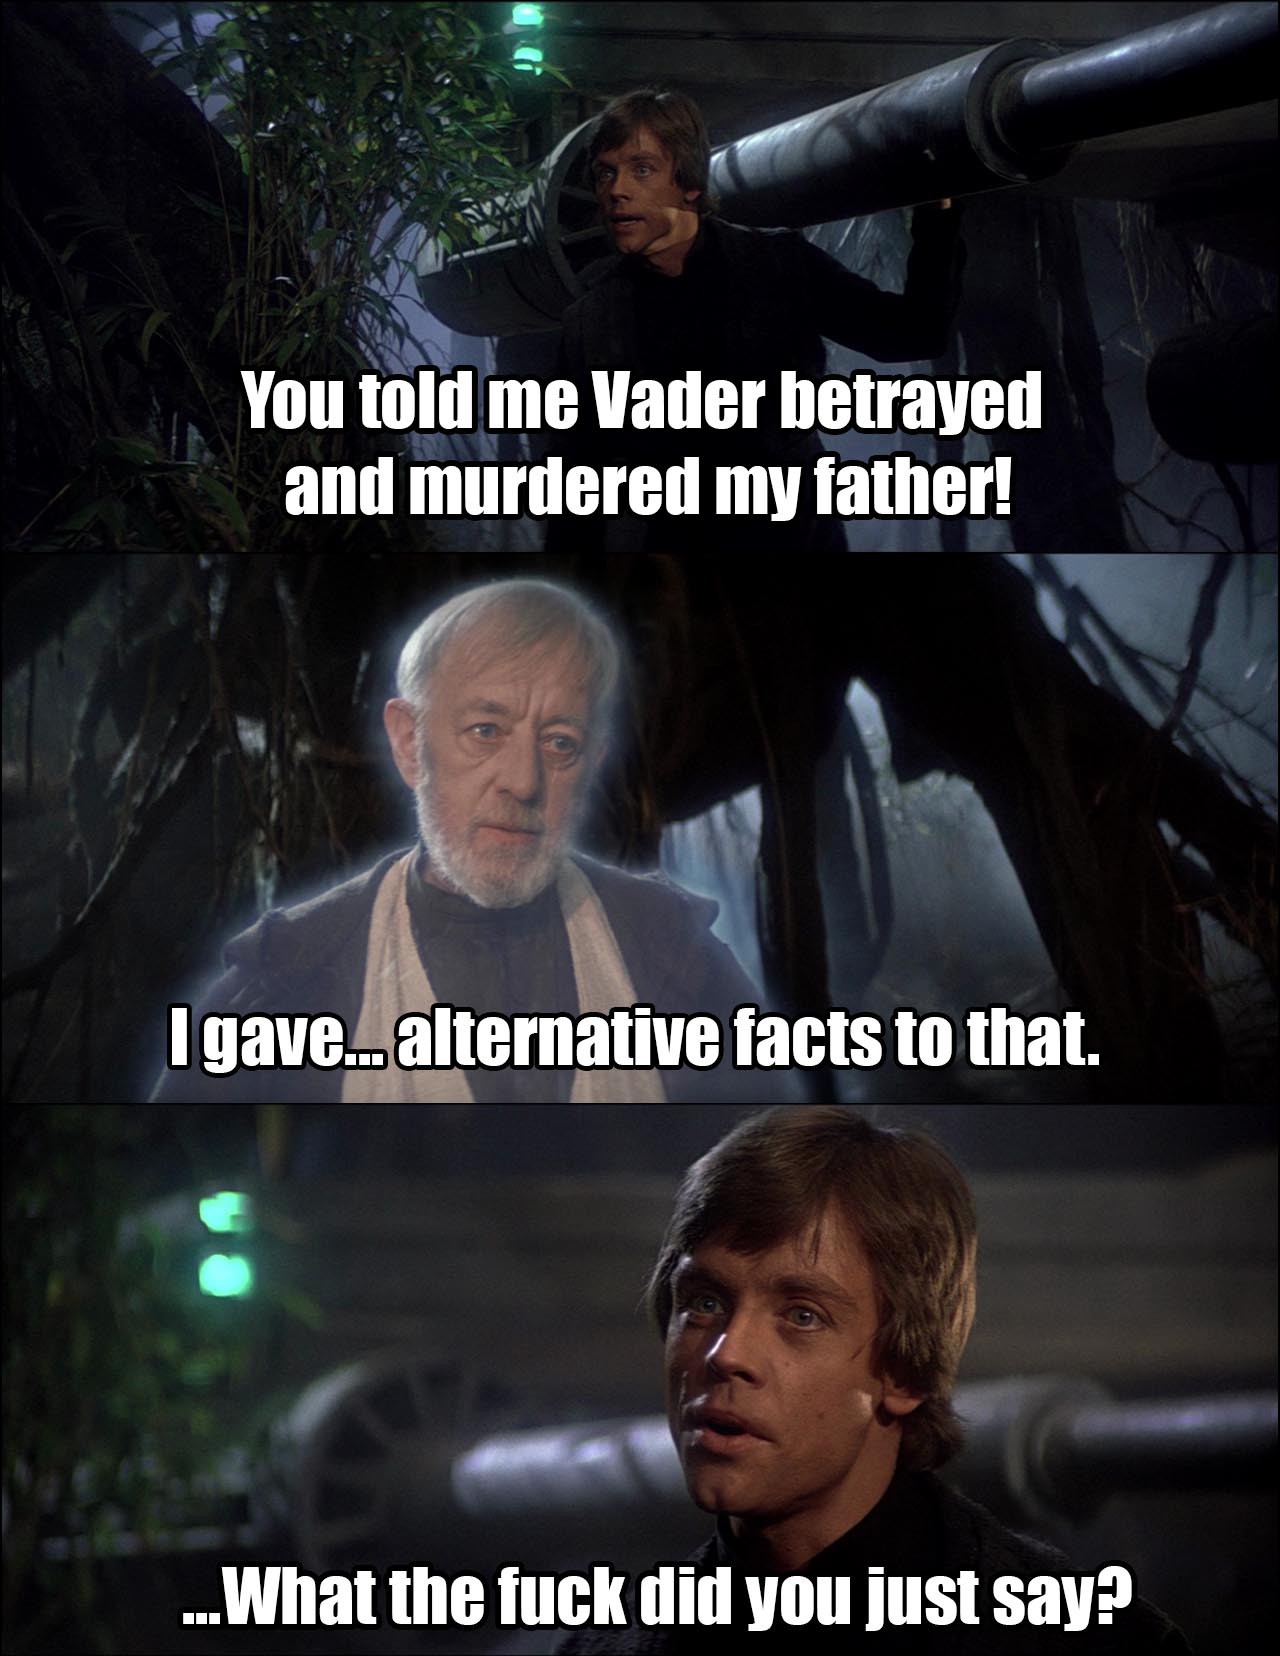 santa pod raceway - You told me Vader betrayed and murdered my father! Igave... alternative facts to that. ...What the fuck did you just say?